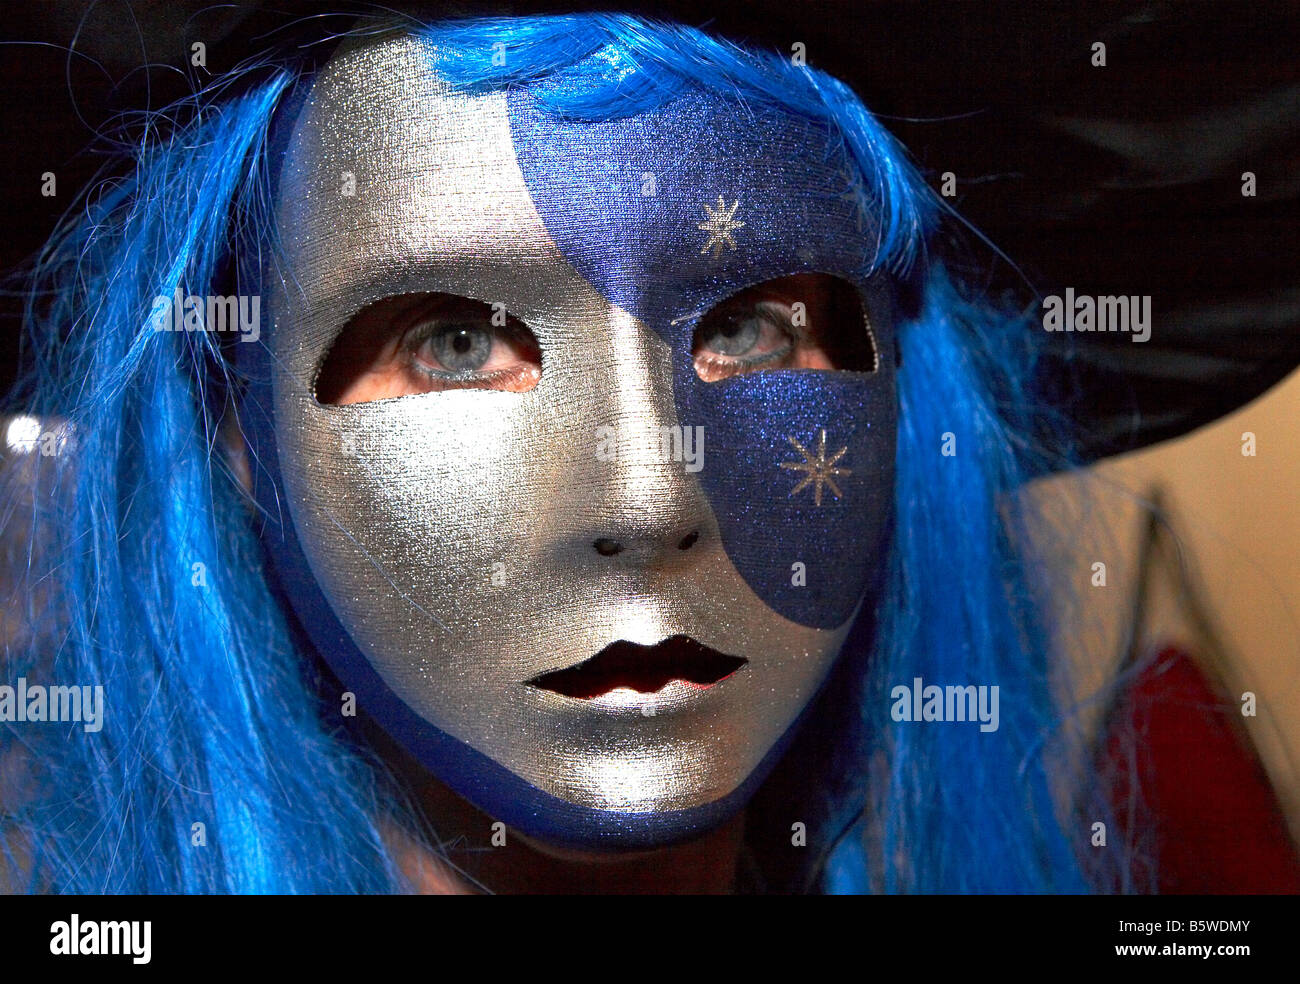 Witch With Blue Hair Halloween Party London UK Europe Stock Photo